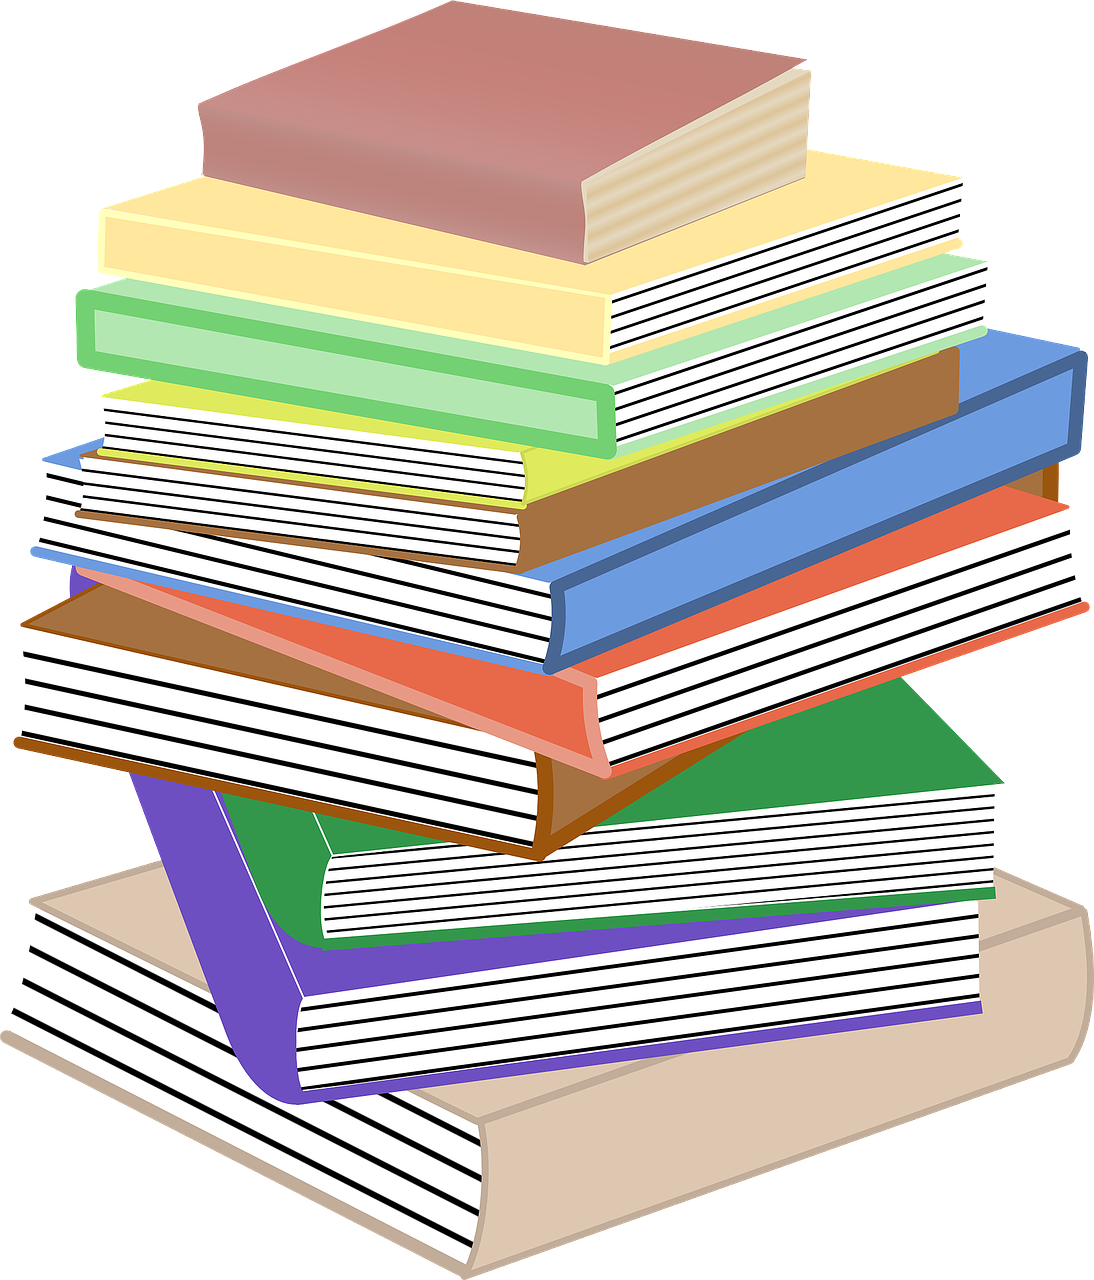 books,stacked,pile,stacks,textbooks,education,stack,library,study,reading,university,free vector graphics,free pictures, free photos, free images, royalty free, free illustrations, public domain